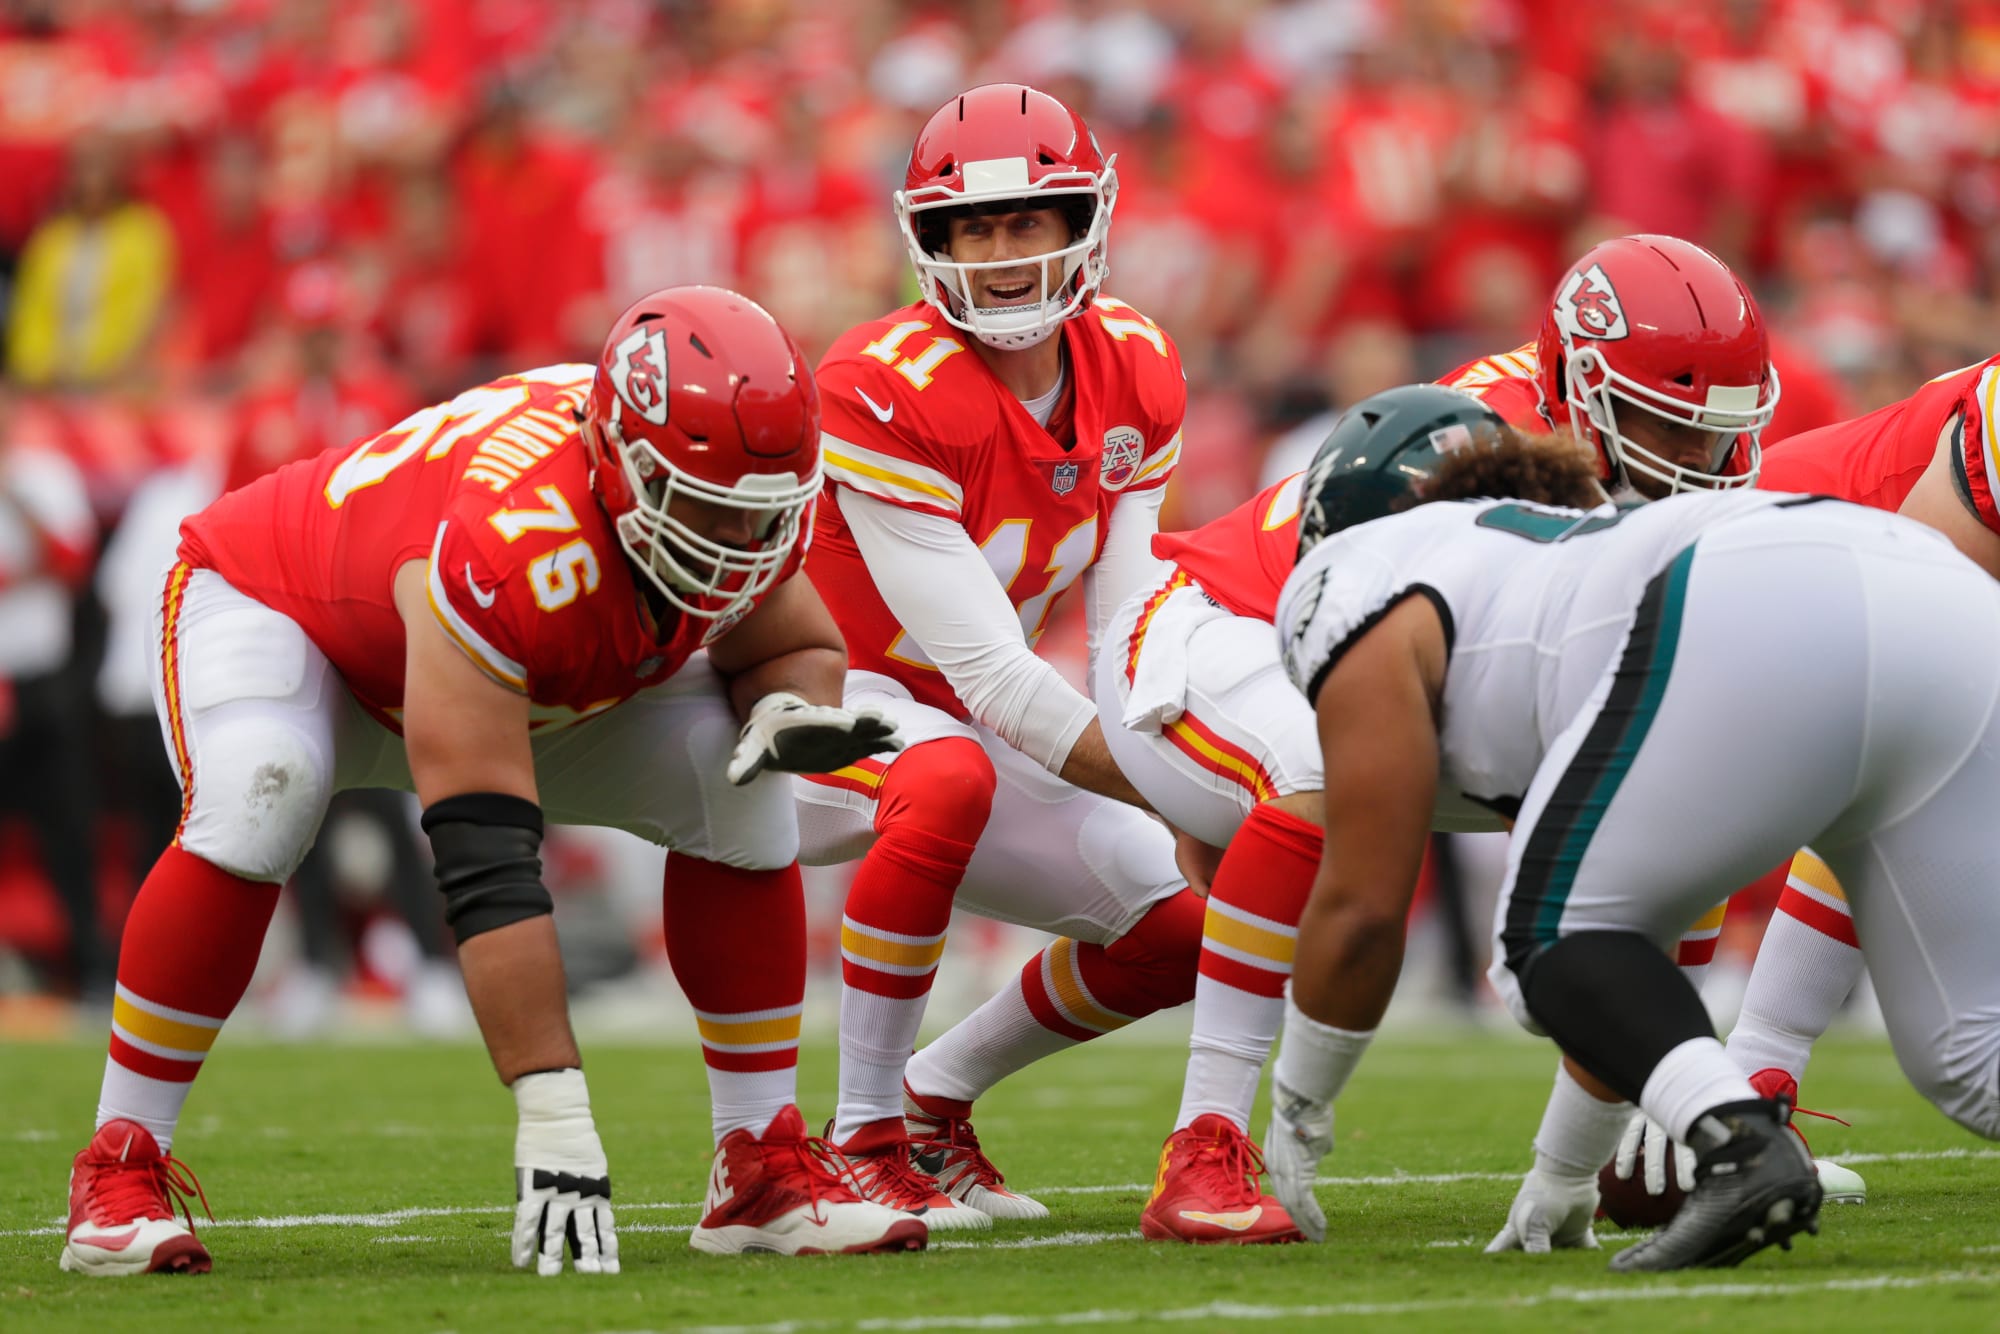 Eagles vs. Chiefs Highlights, game tracker and more